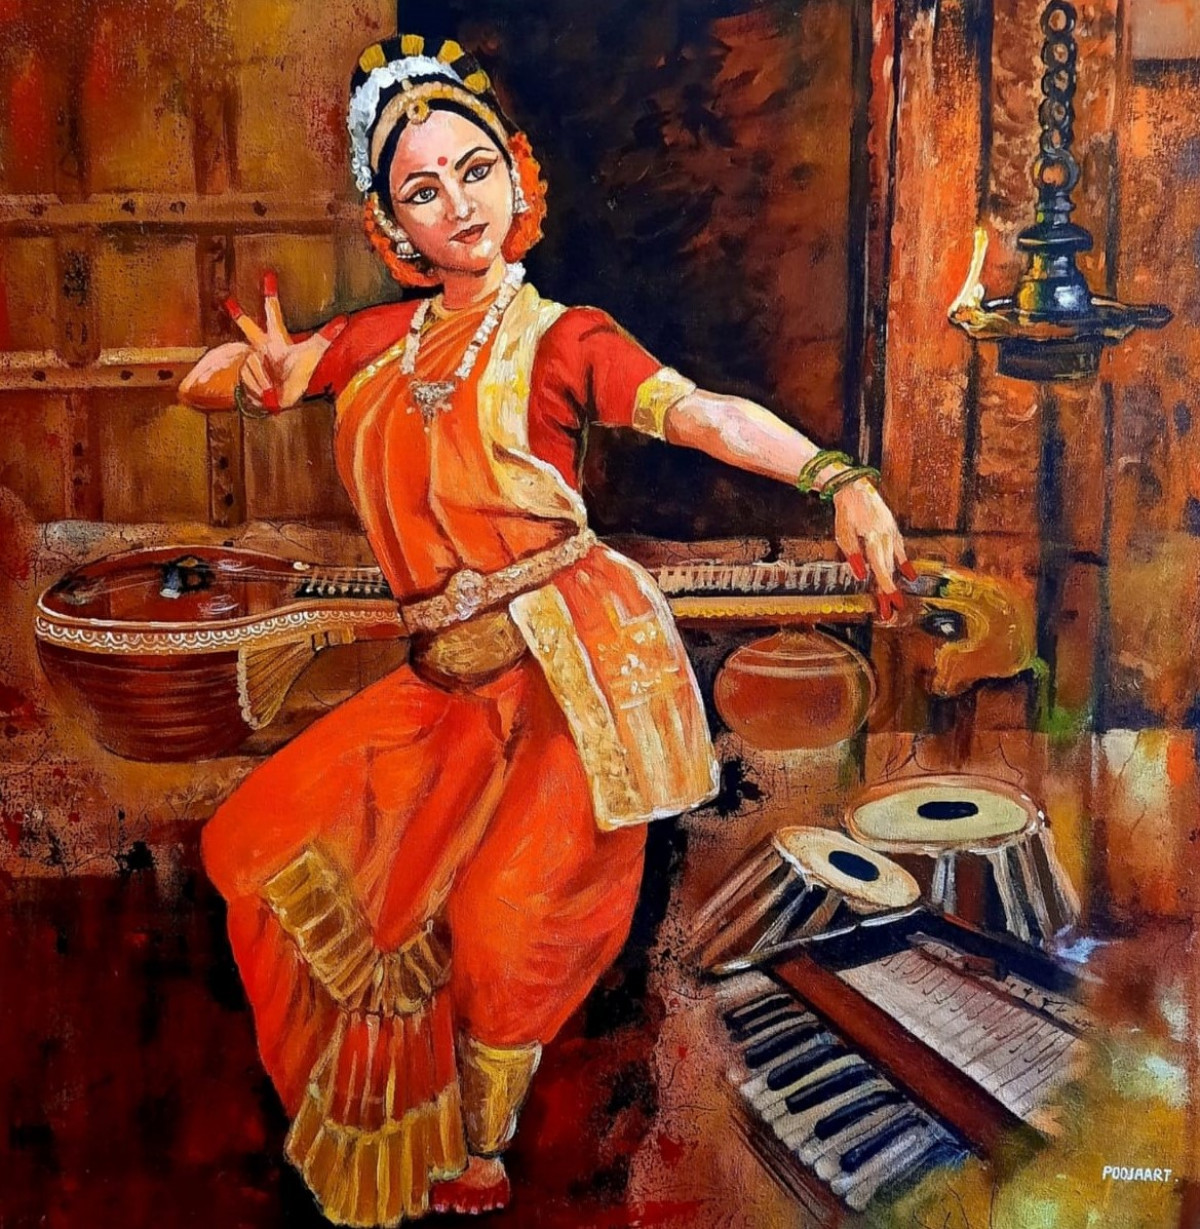 Painting by Pooja Vivek Balkundre